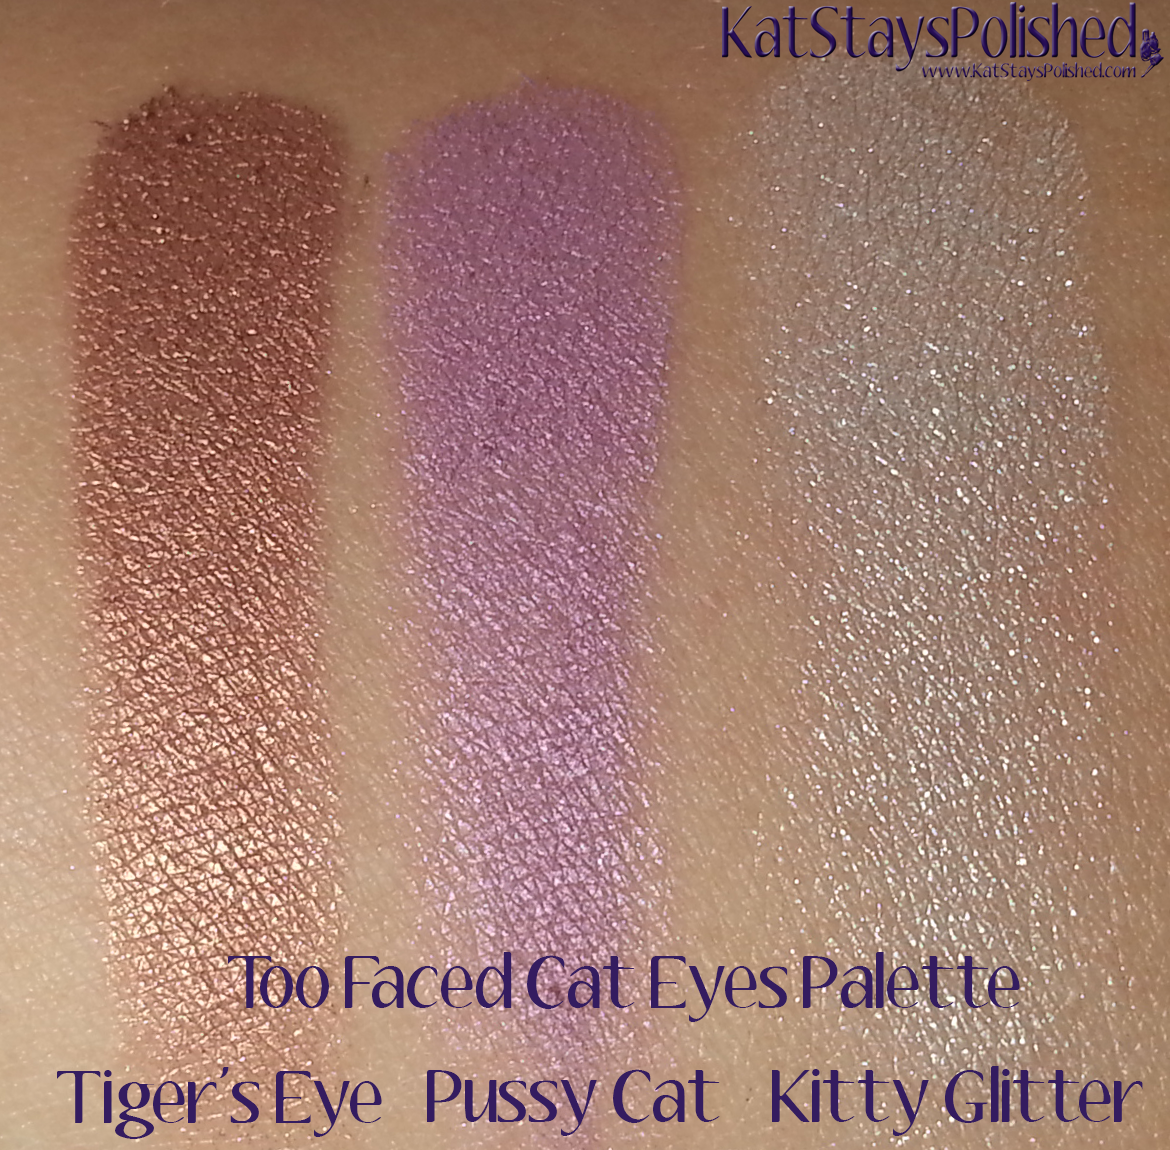 Too Faced Cat Eyes Palette - Tiger's Eye, Pussy Cat, Kitty Glitter | Kat Stays Polished